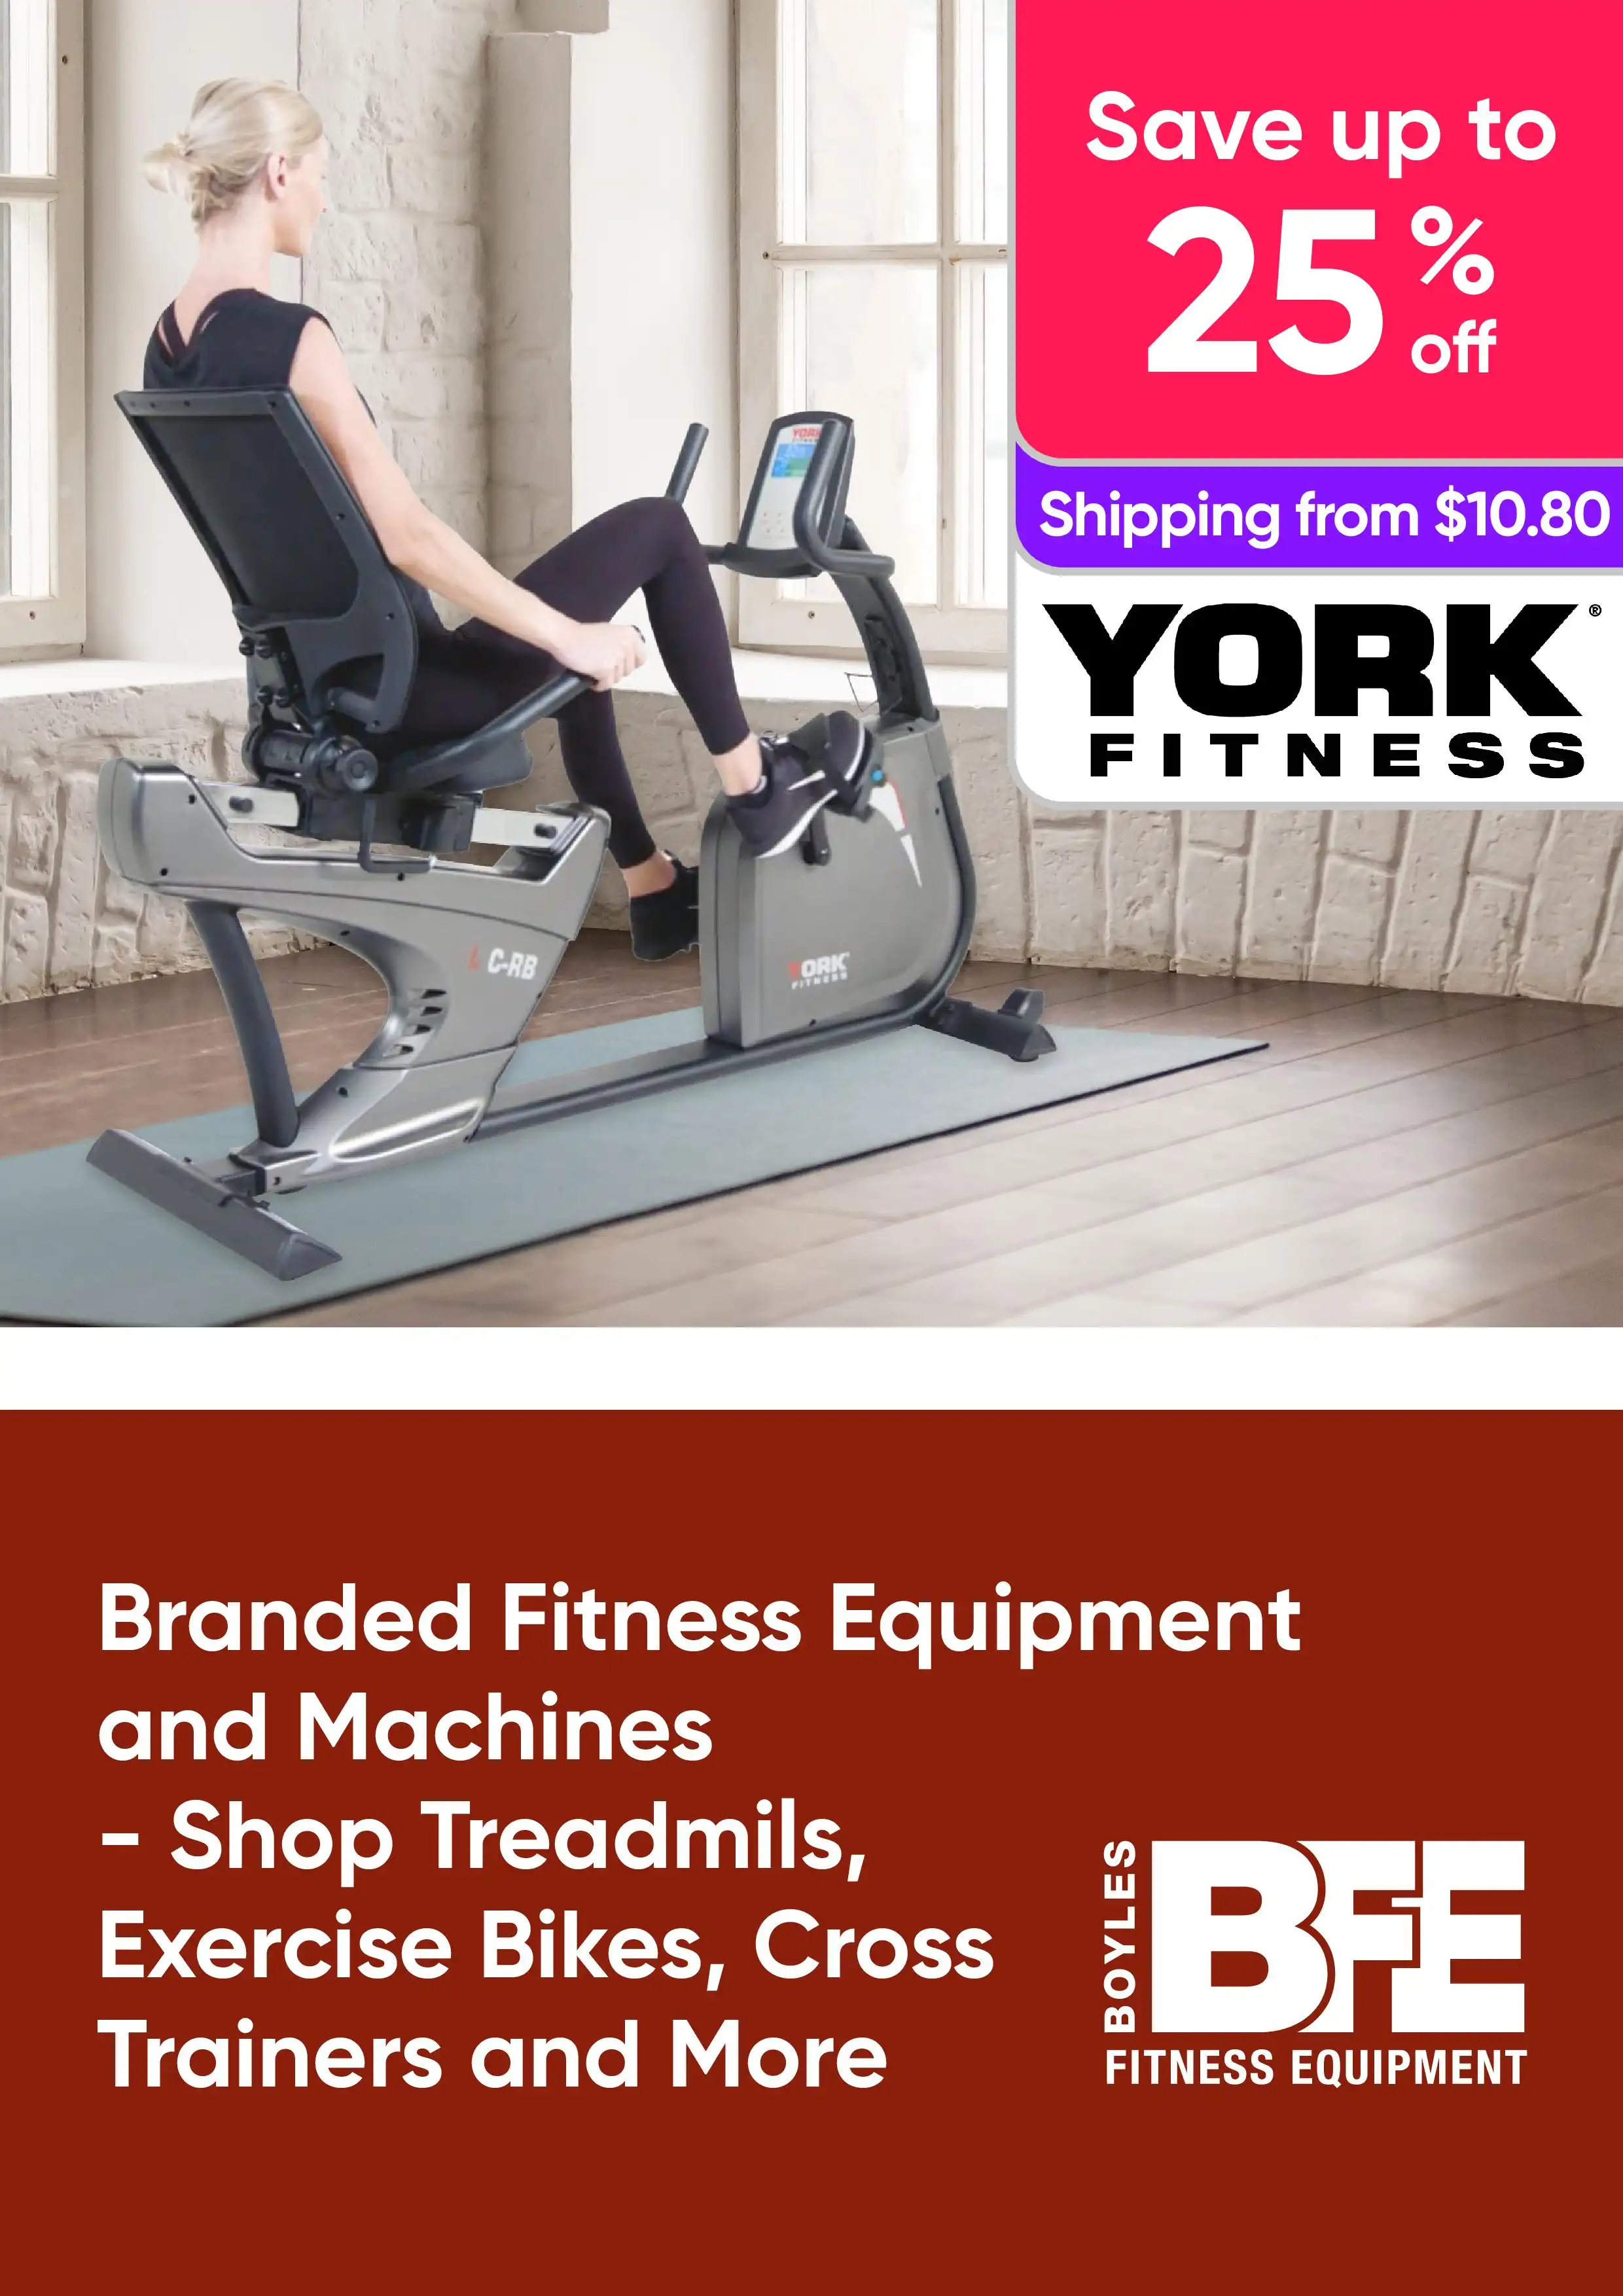 Save Up To 25% On a Range of Branded Fitness Equipment and Machines - Shop Treadmills and More